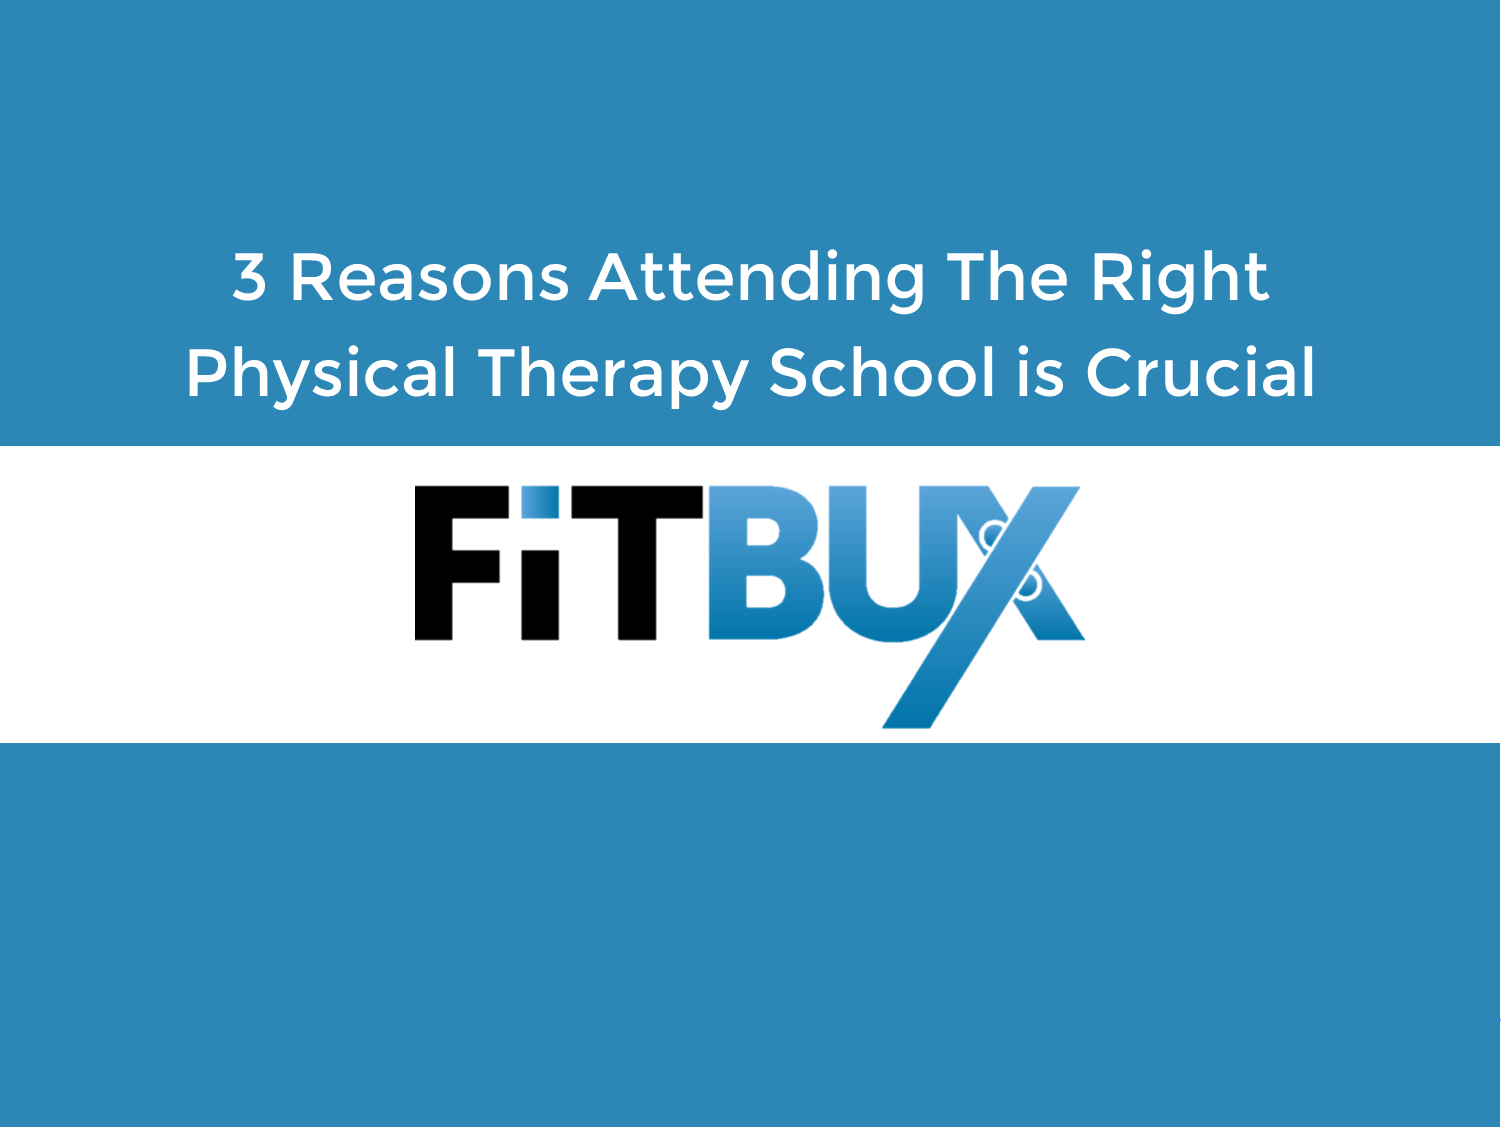 The right physical therapy school